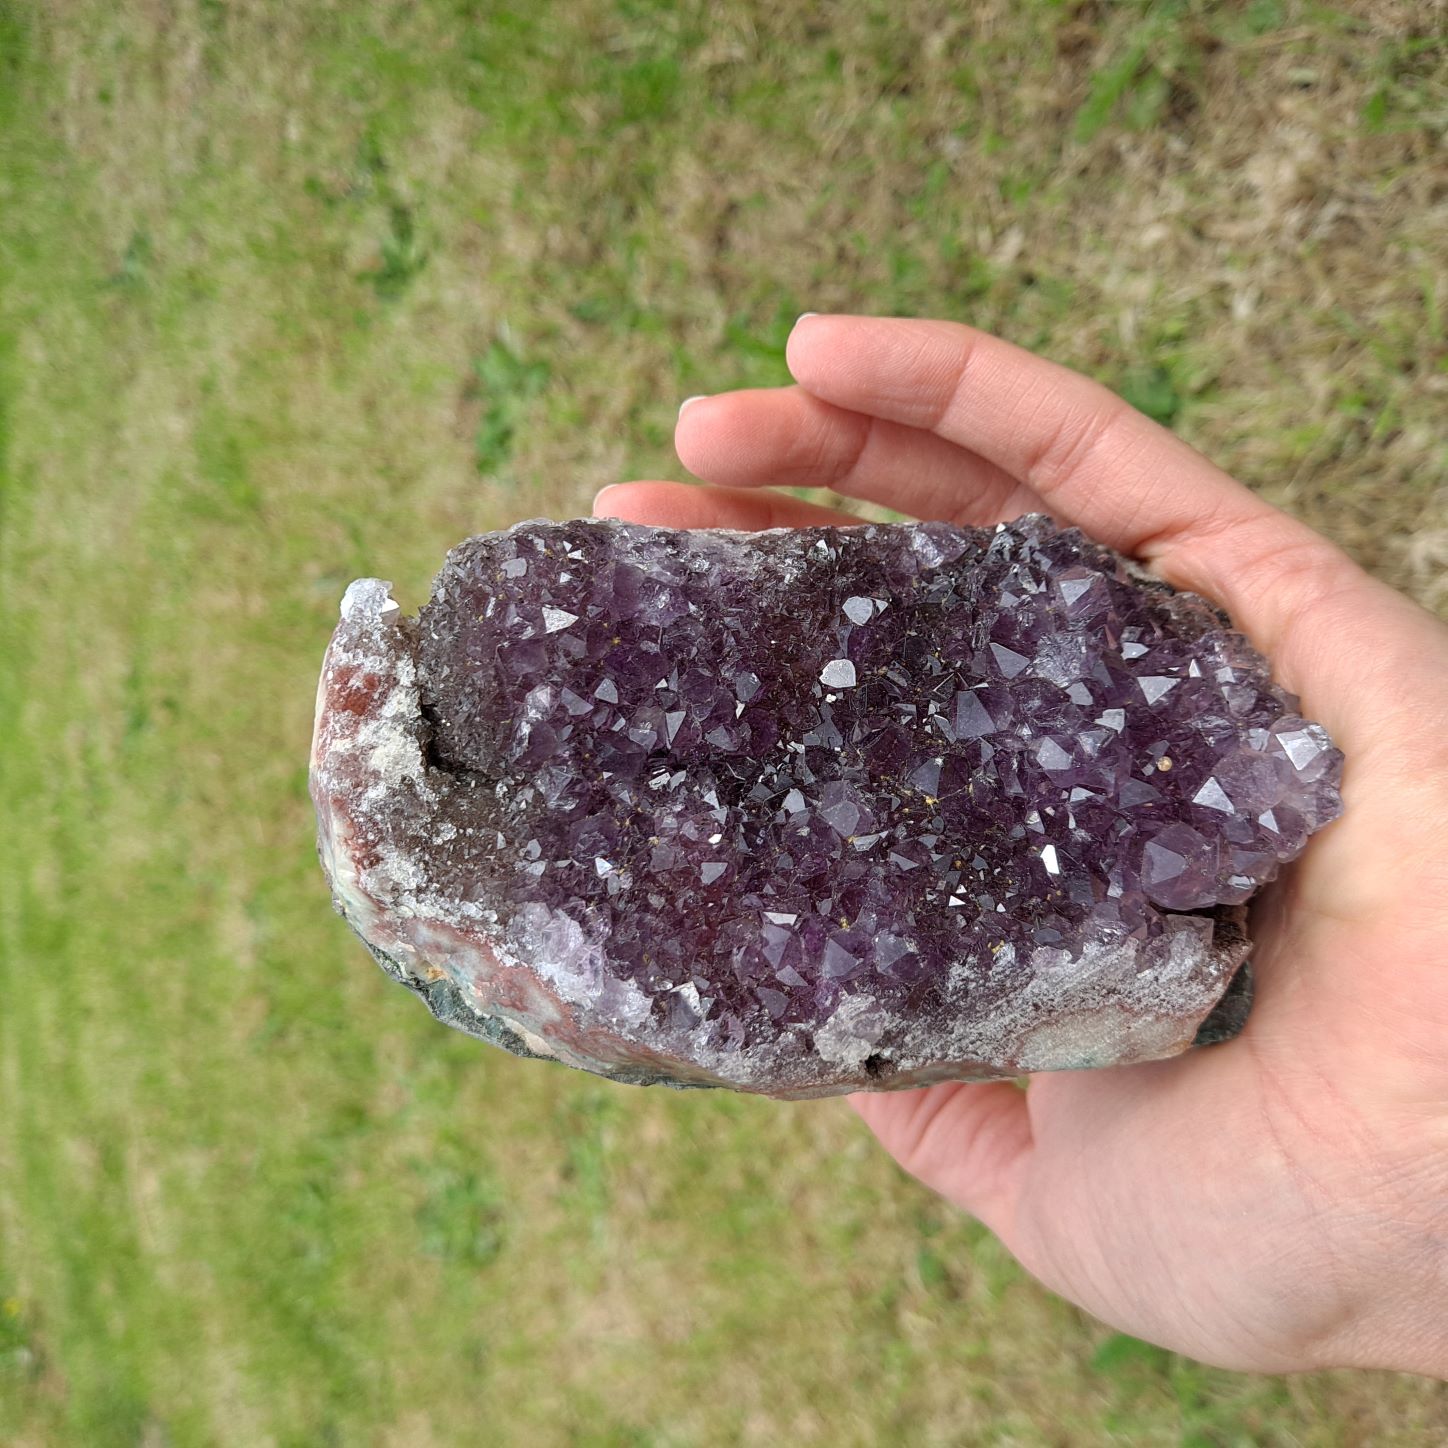 Dumi's Crystals | Amethyst Cluster (10.6cm, Striking) held delicately | Delicately hold this Amethyst Cluster (10.6 x 6.3 x 6.9cm) between your thumb and forefinger. Amethyst is believed to enhance focus, clarity, and spiritual connection.